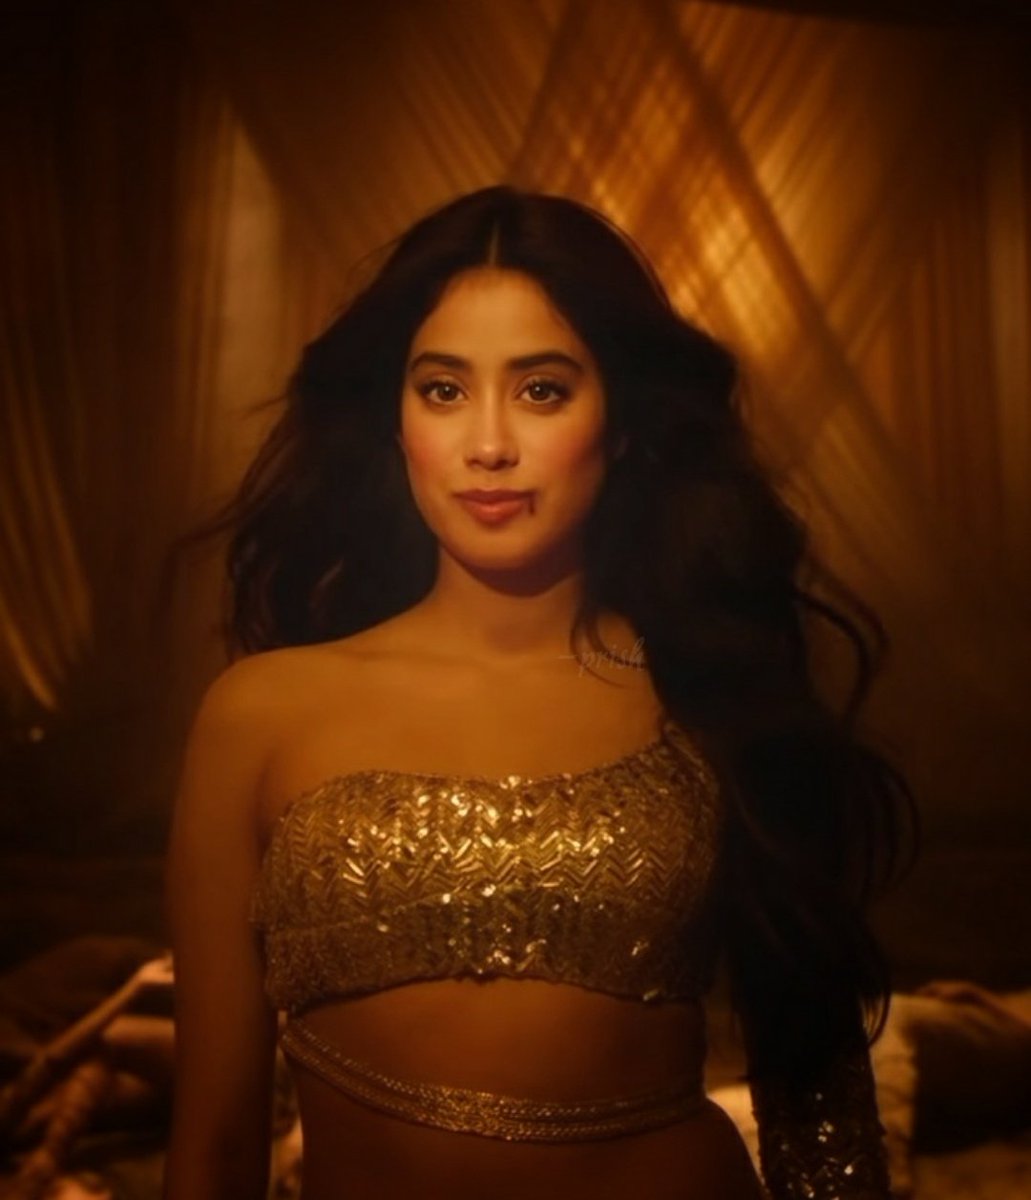 The song wasn't as cool as Panghat but JANHVI KAPOOR, MY GIRL, WHAT WAS THAT, SWEETHEART? 🤏🏼🕶😳 #NadiyonPaar